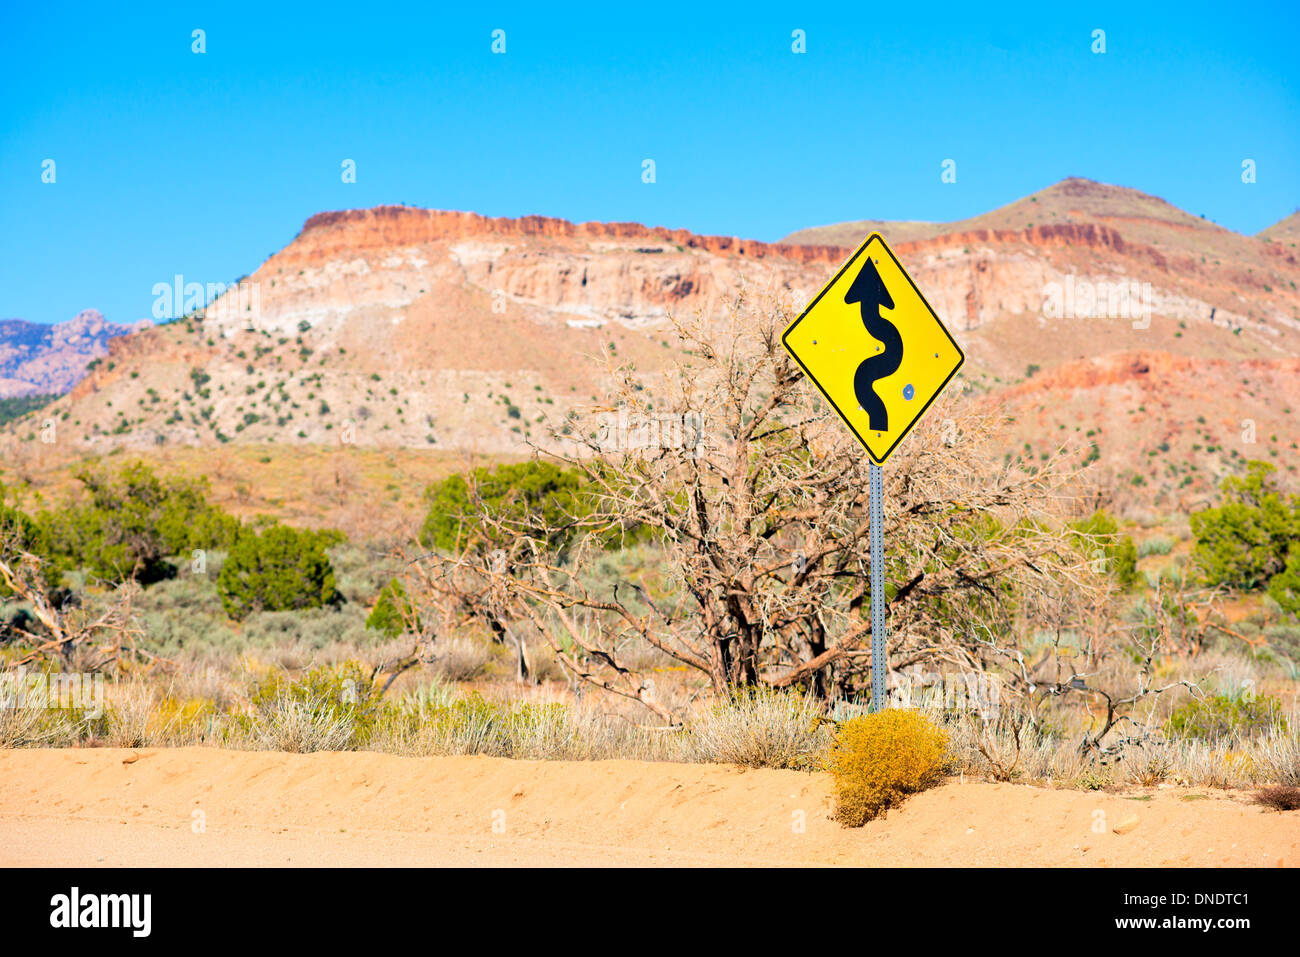 Desert road with winding road sign Stock Photo